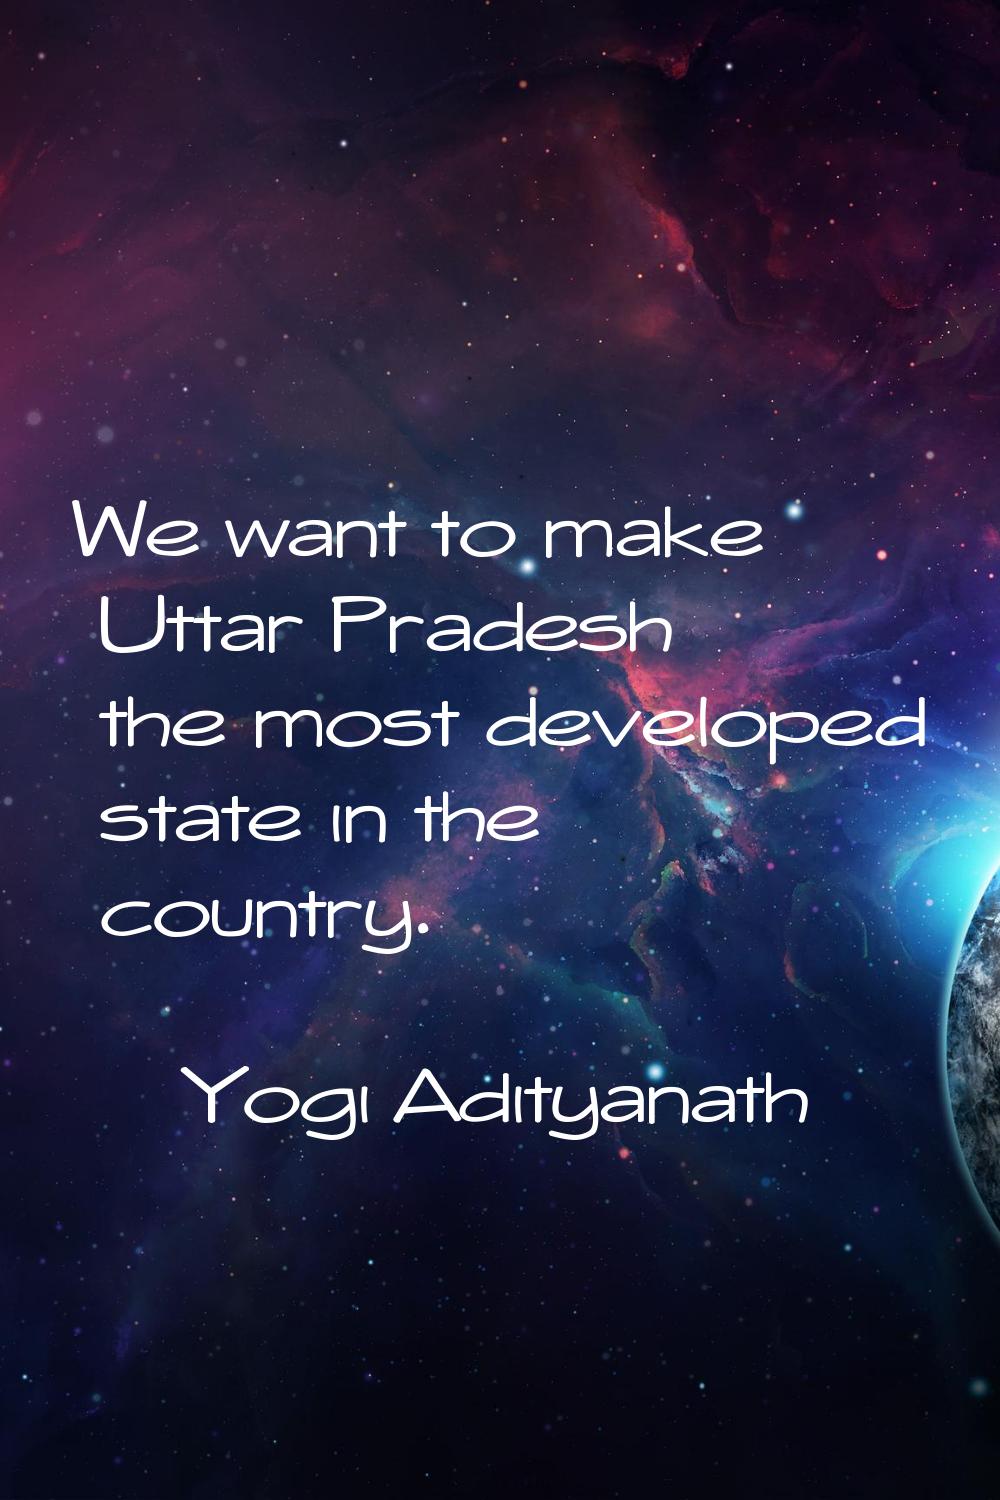 We want to make Uttar Pradesh the most developed state in the country.